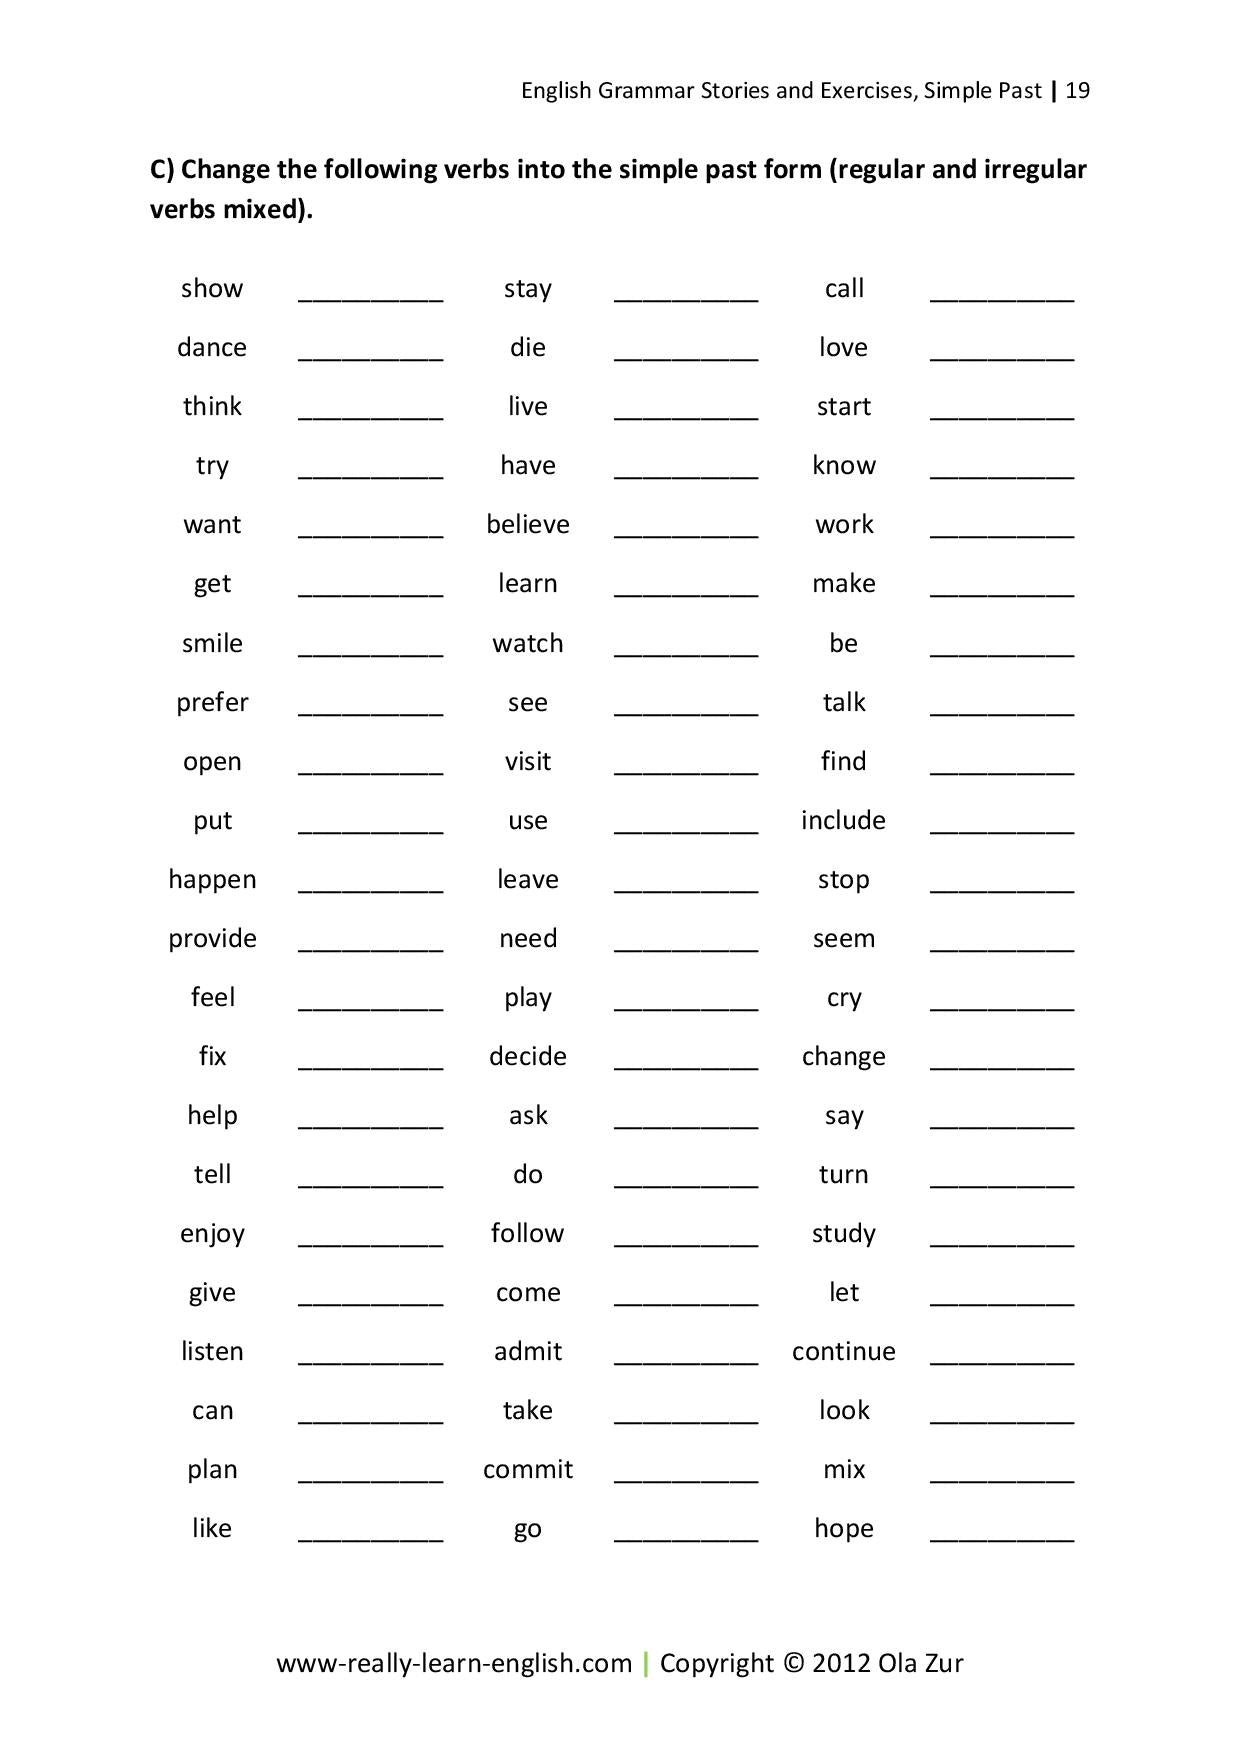 download-past-tenses-exercises-images